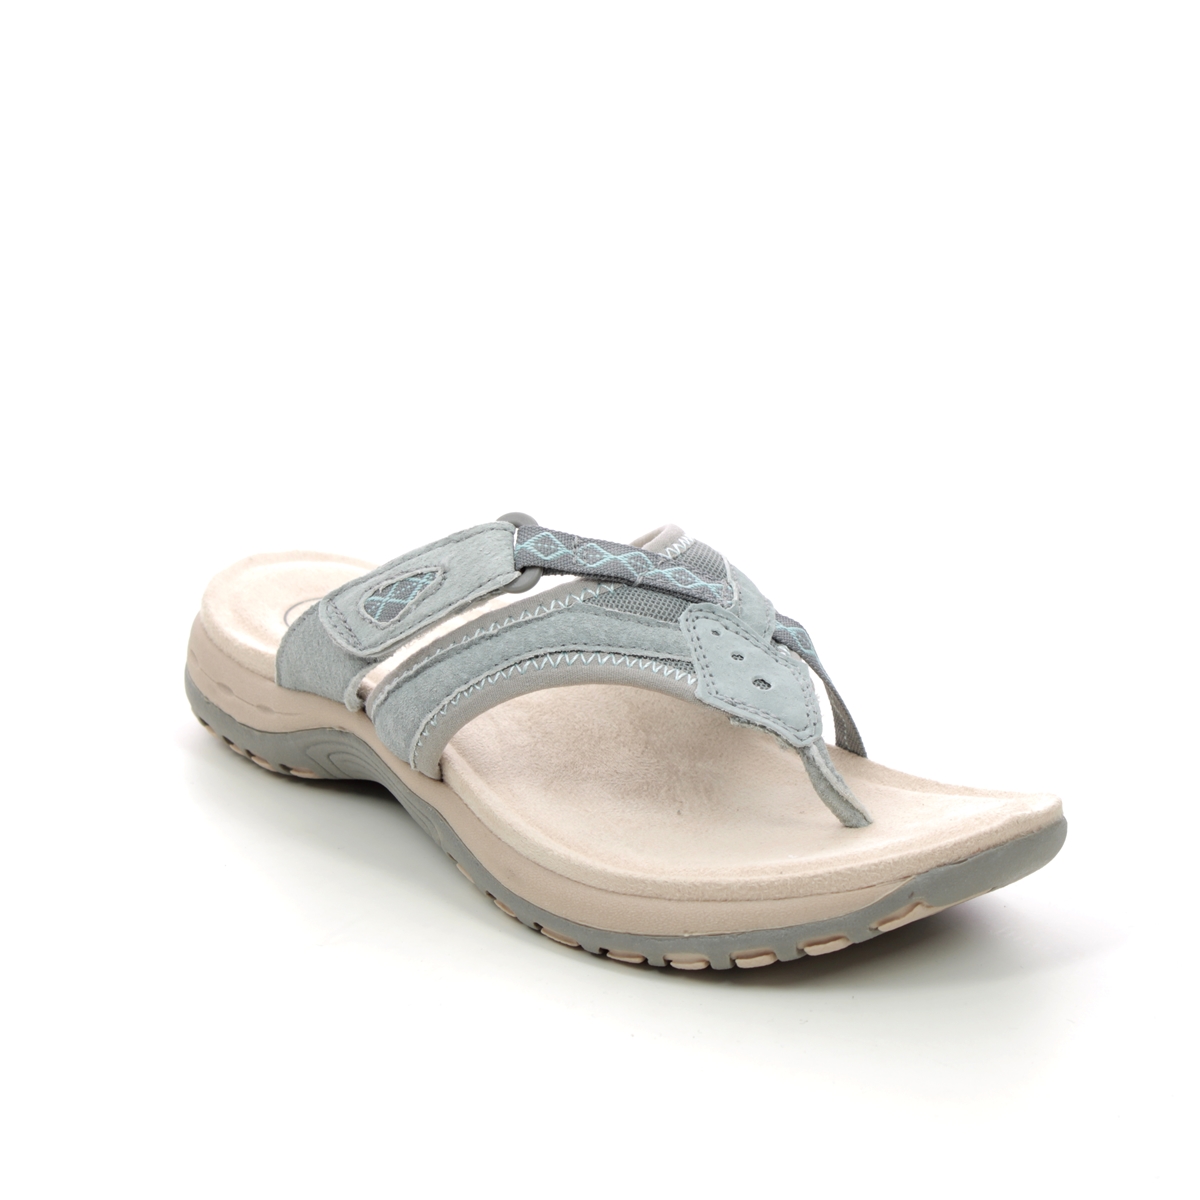 Earth Spirit Juliet 01 Grey Suede Womens Toe Post Sandals 40508-03 in a Plain Leather in Size 9